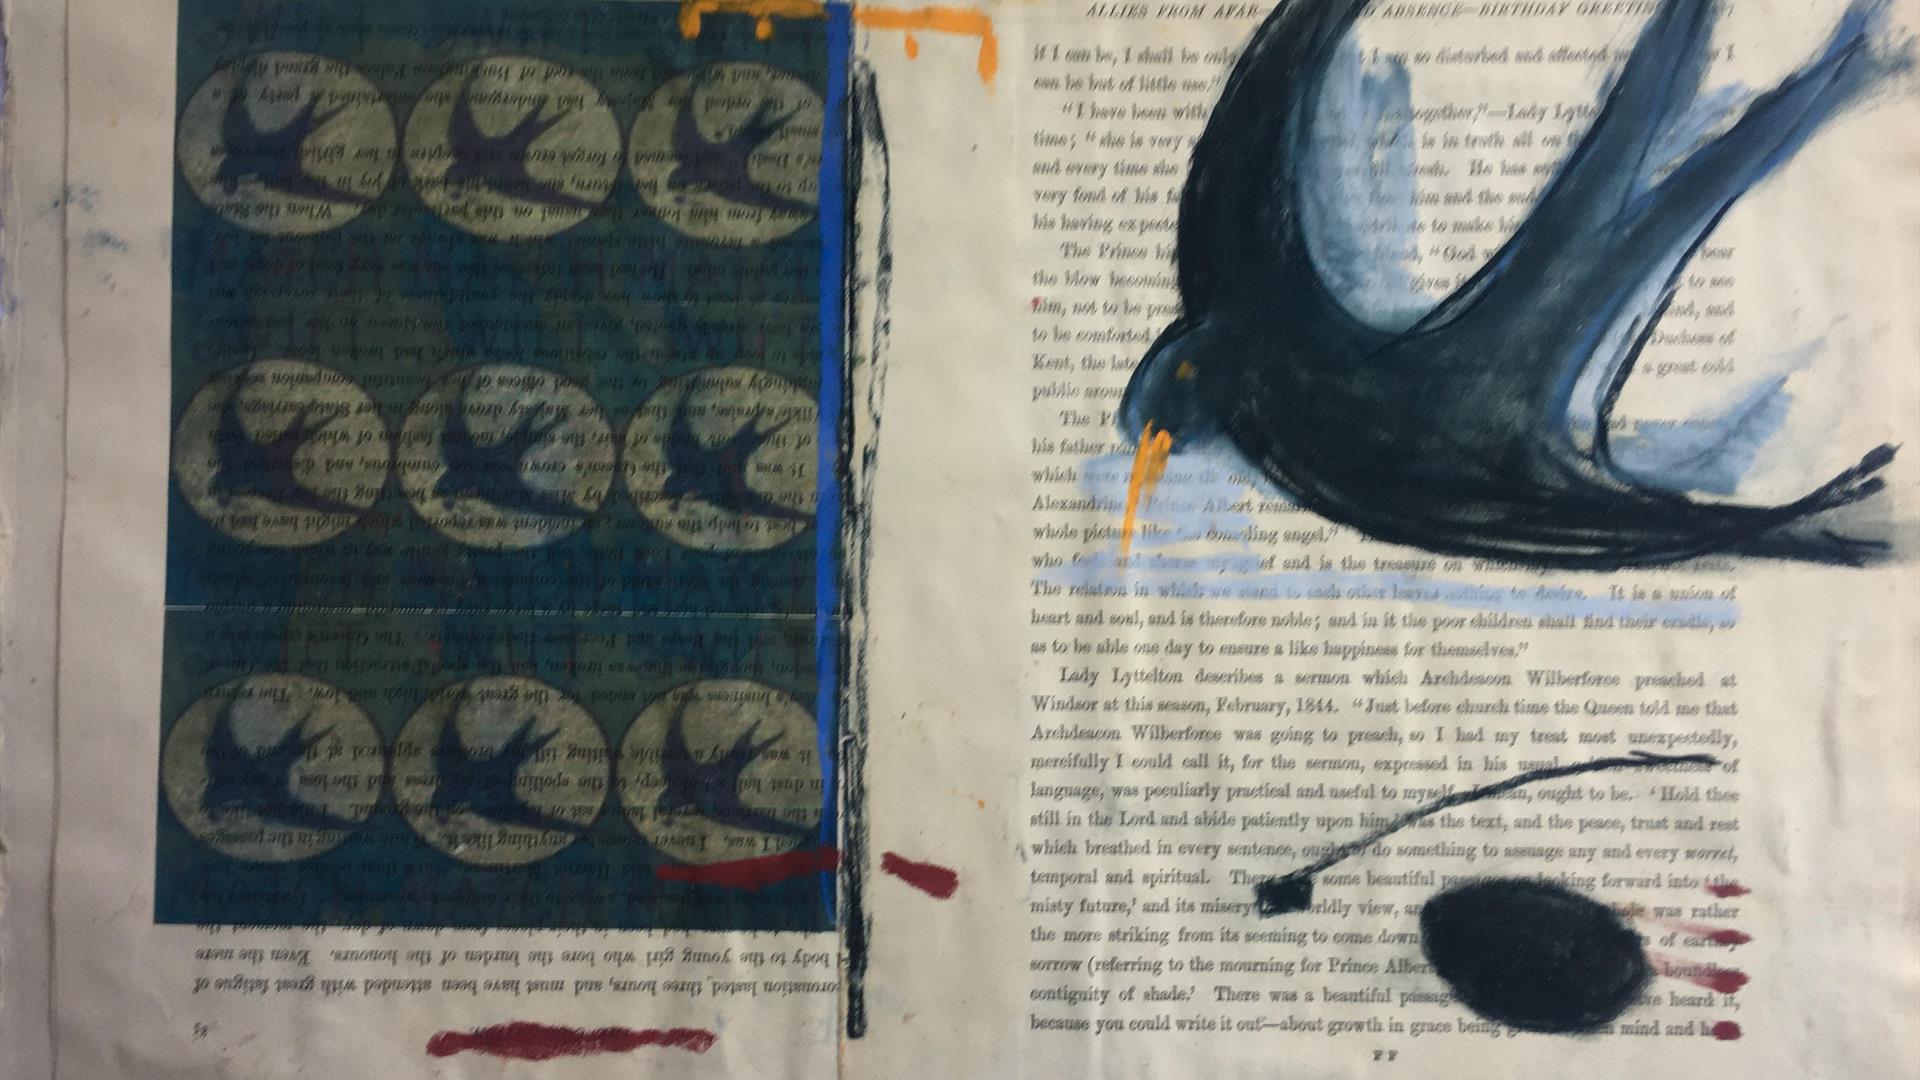 Image of a painted bird, a swallow on the pages of a book.